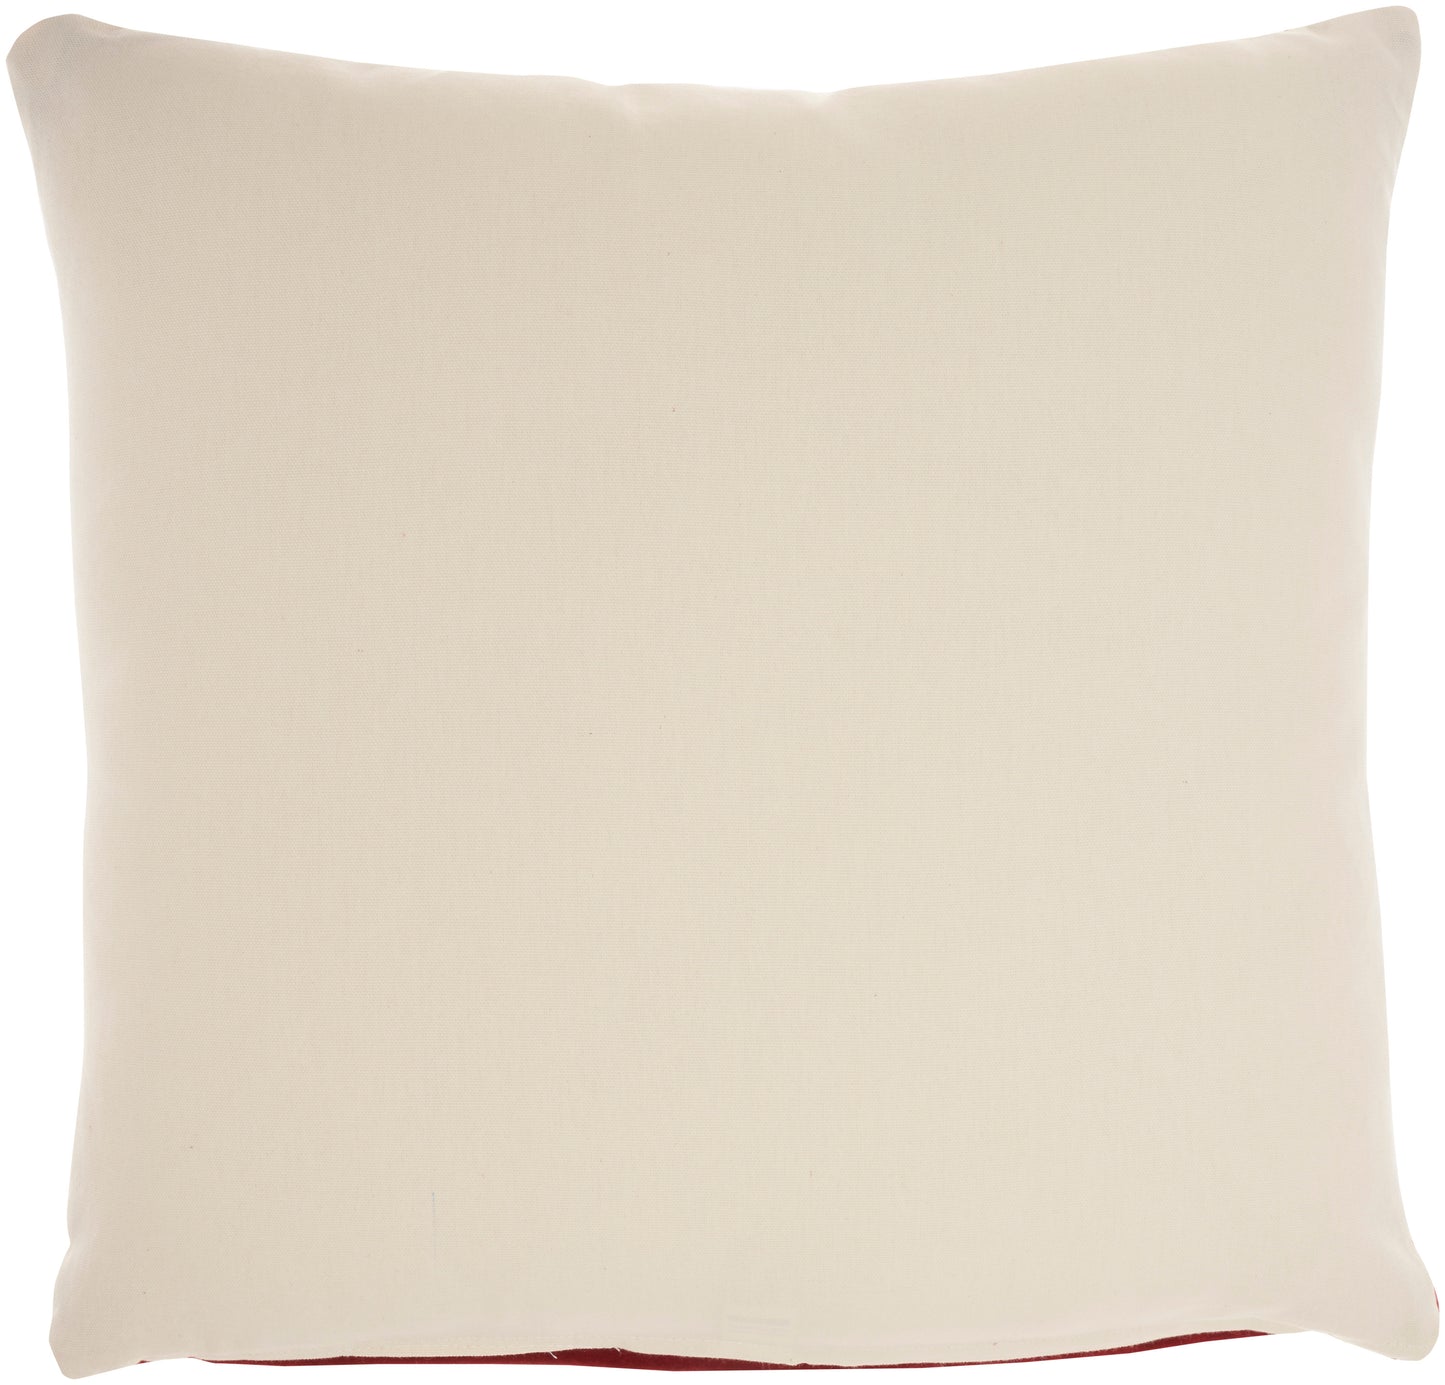 Life Styles SS900 Cotton Solid Velvet Throw Pillow From Mina Victory By Nourison Rugs